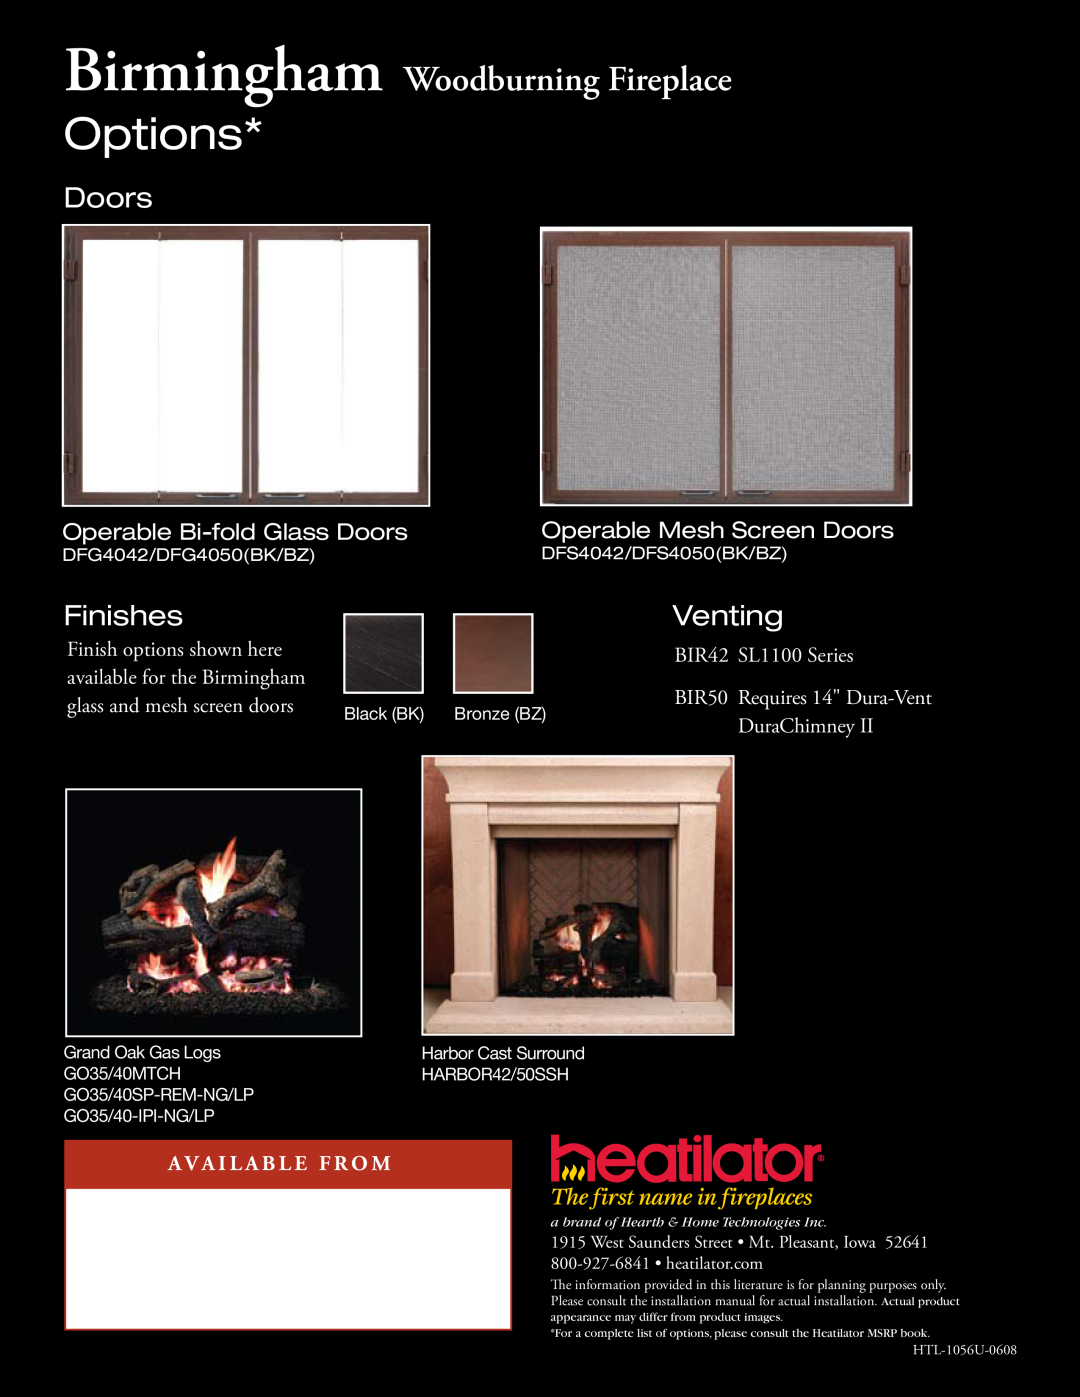 Hearth and Home Technologies Options, Birmingham Woodburning Fireplace, Doors, Finishes, Venting, DFG4042/DFG4050BK/BZ 